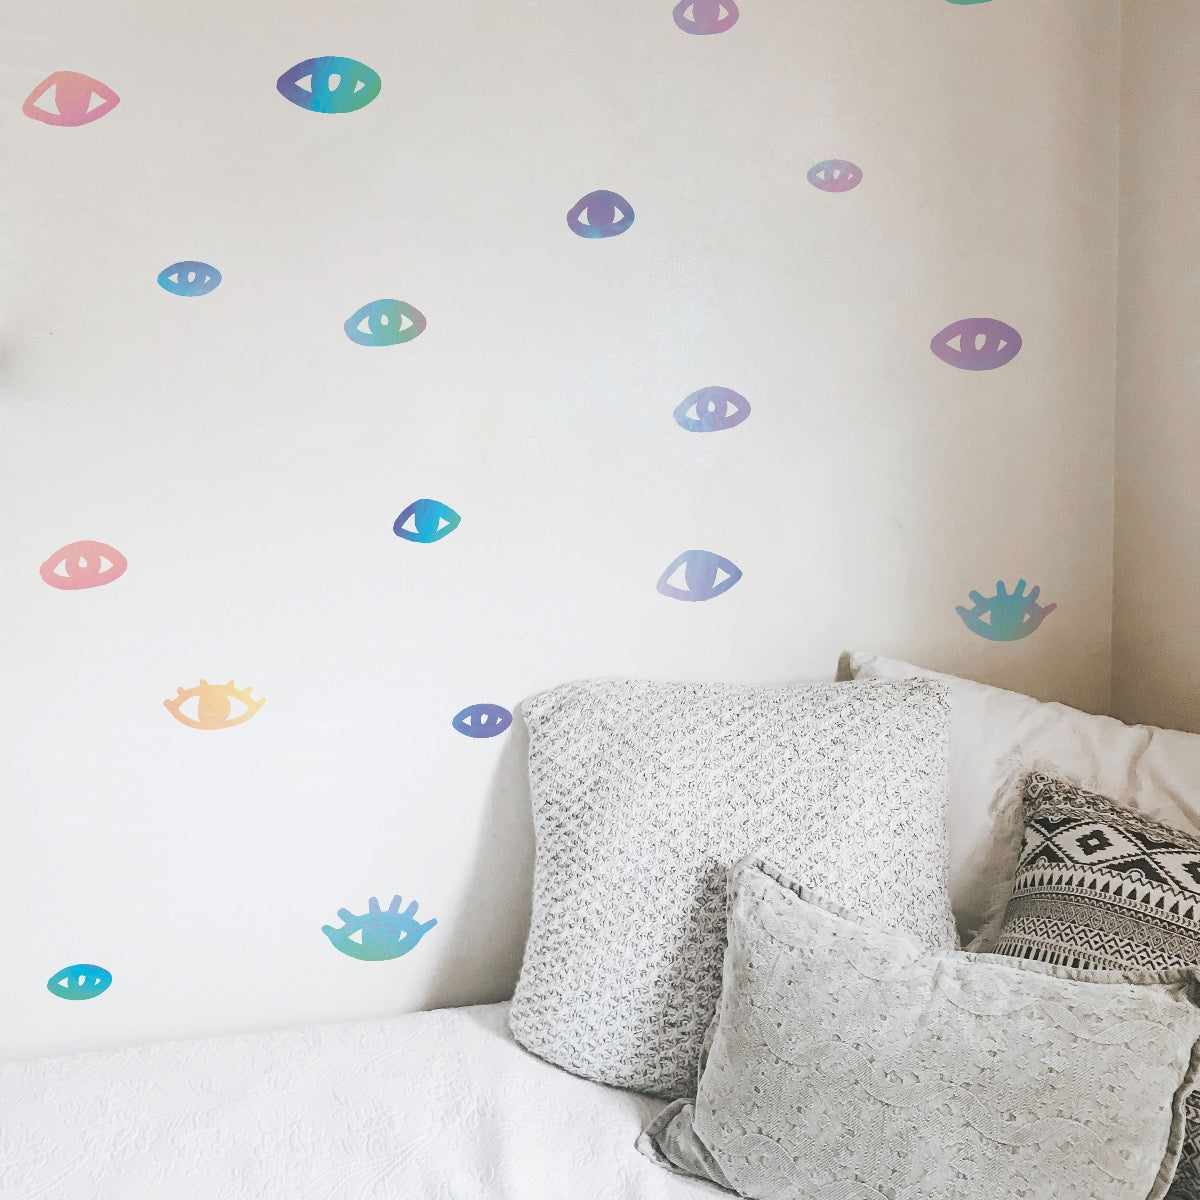 An upclose look at the holographic You Are Seen wall decals from Tempaper placed on a white wall next to a white bed.